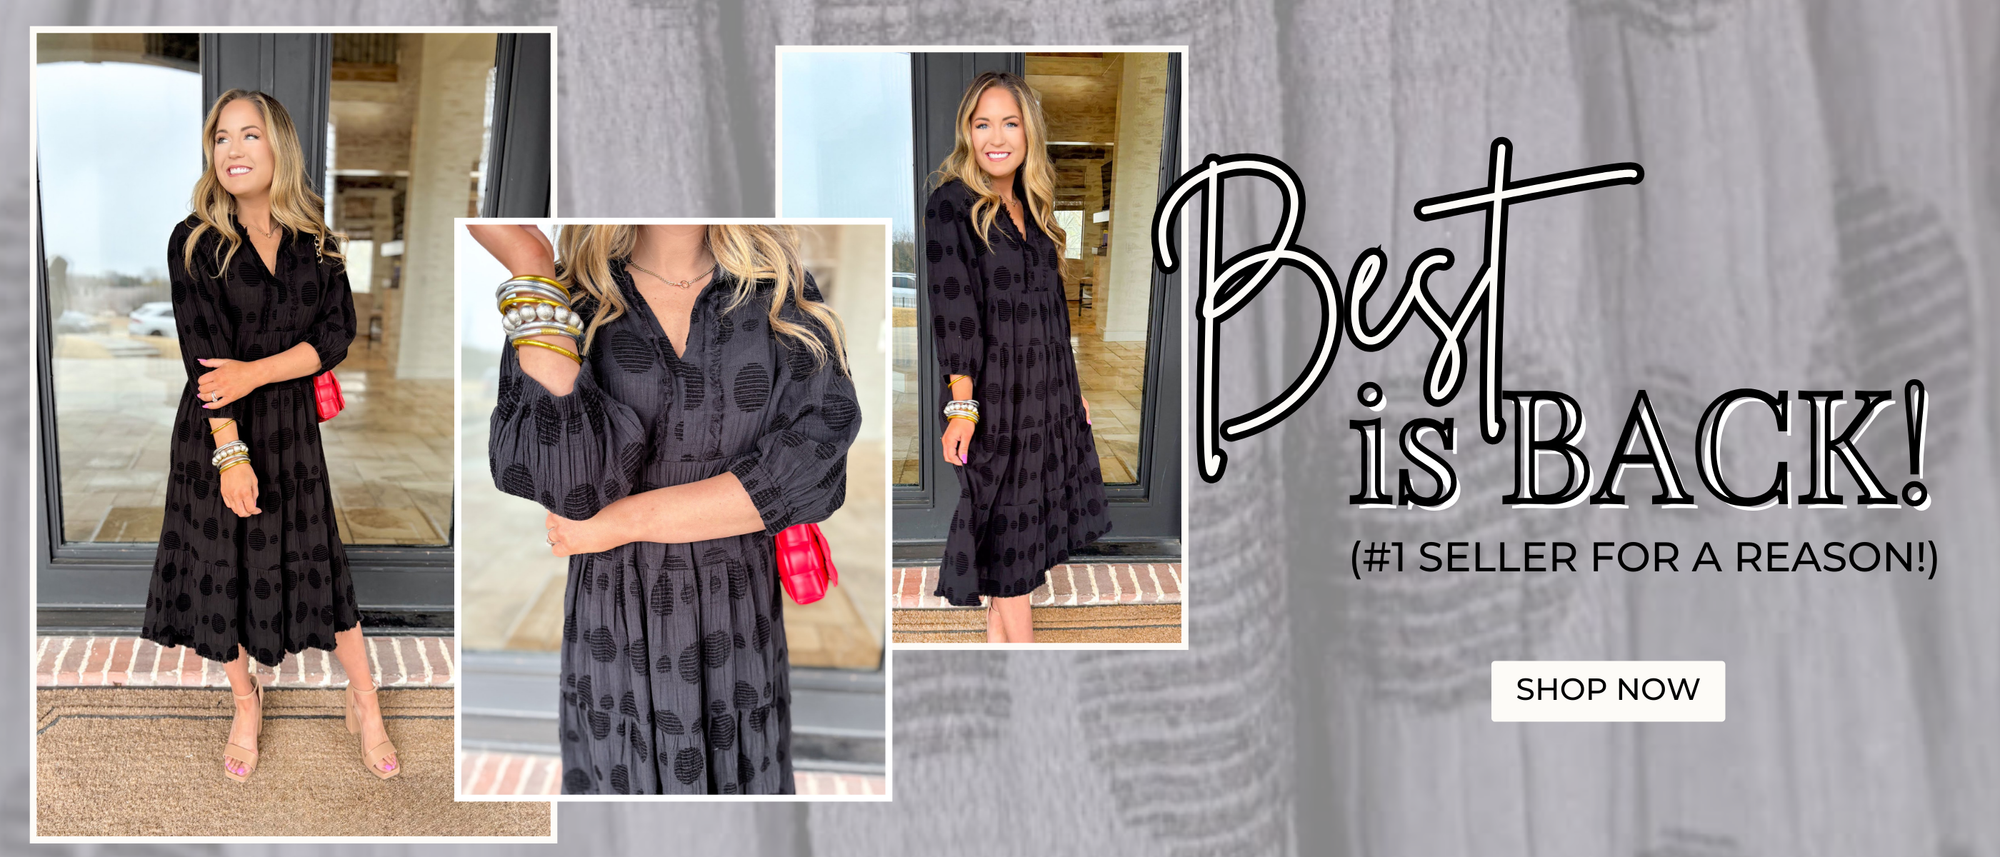 Best is Back! #1 seller for a reason! Model is wearing our Giving Grace Midi Dress by Umgee which features a tiered silhouette with 3/4 sleeves, frayed detail, and a polka dot texture.Shop now.